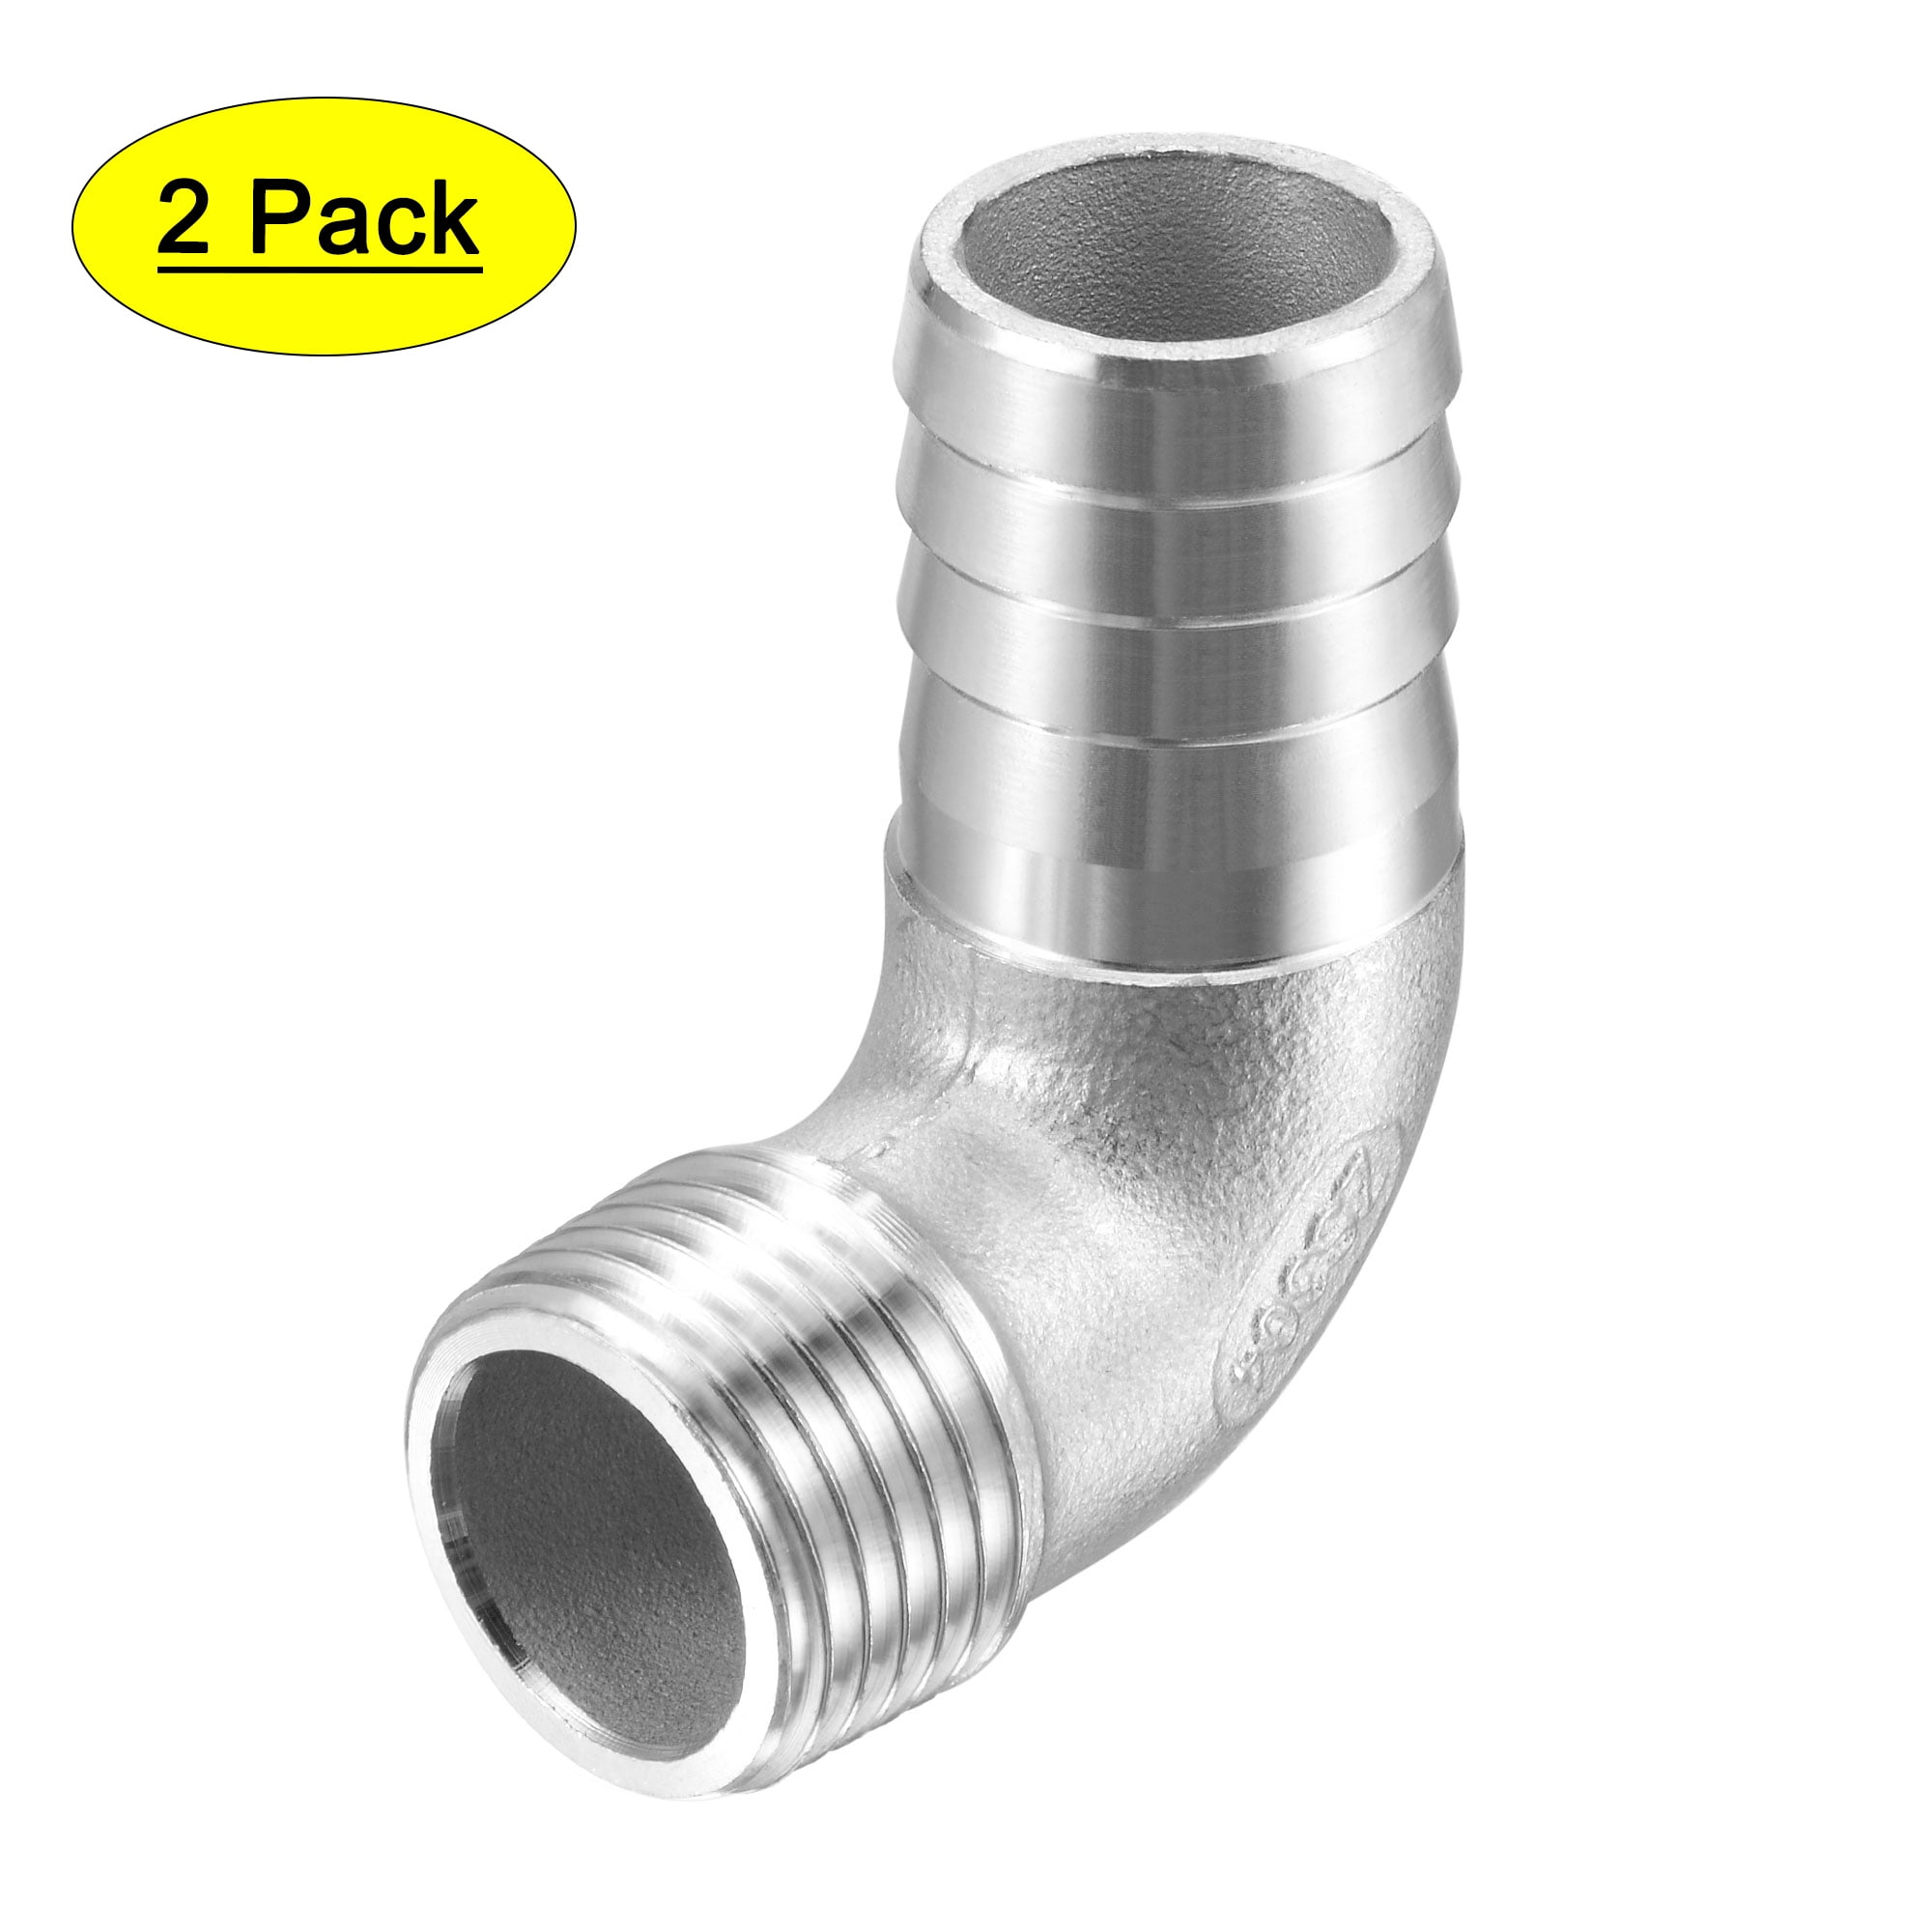 Barbed Hose Fitting: M27 x 2 x 1 ID Hose, Elbow